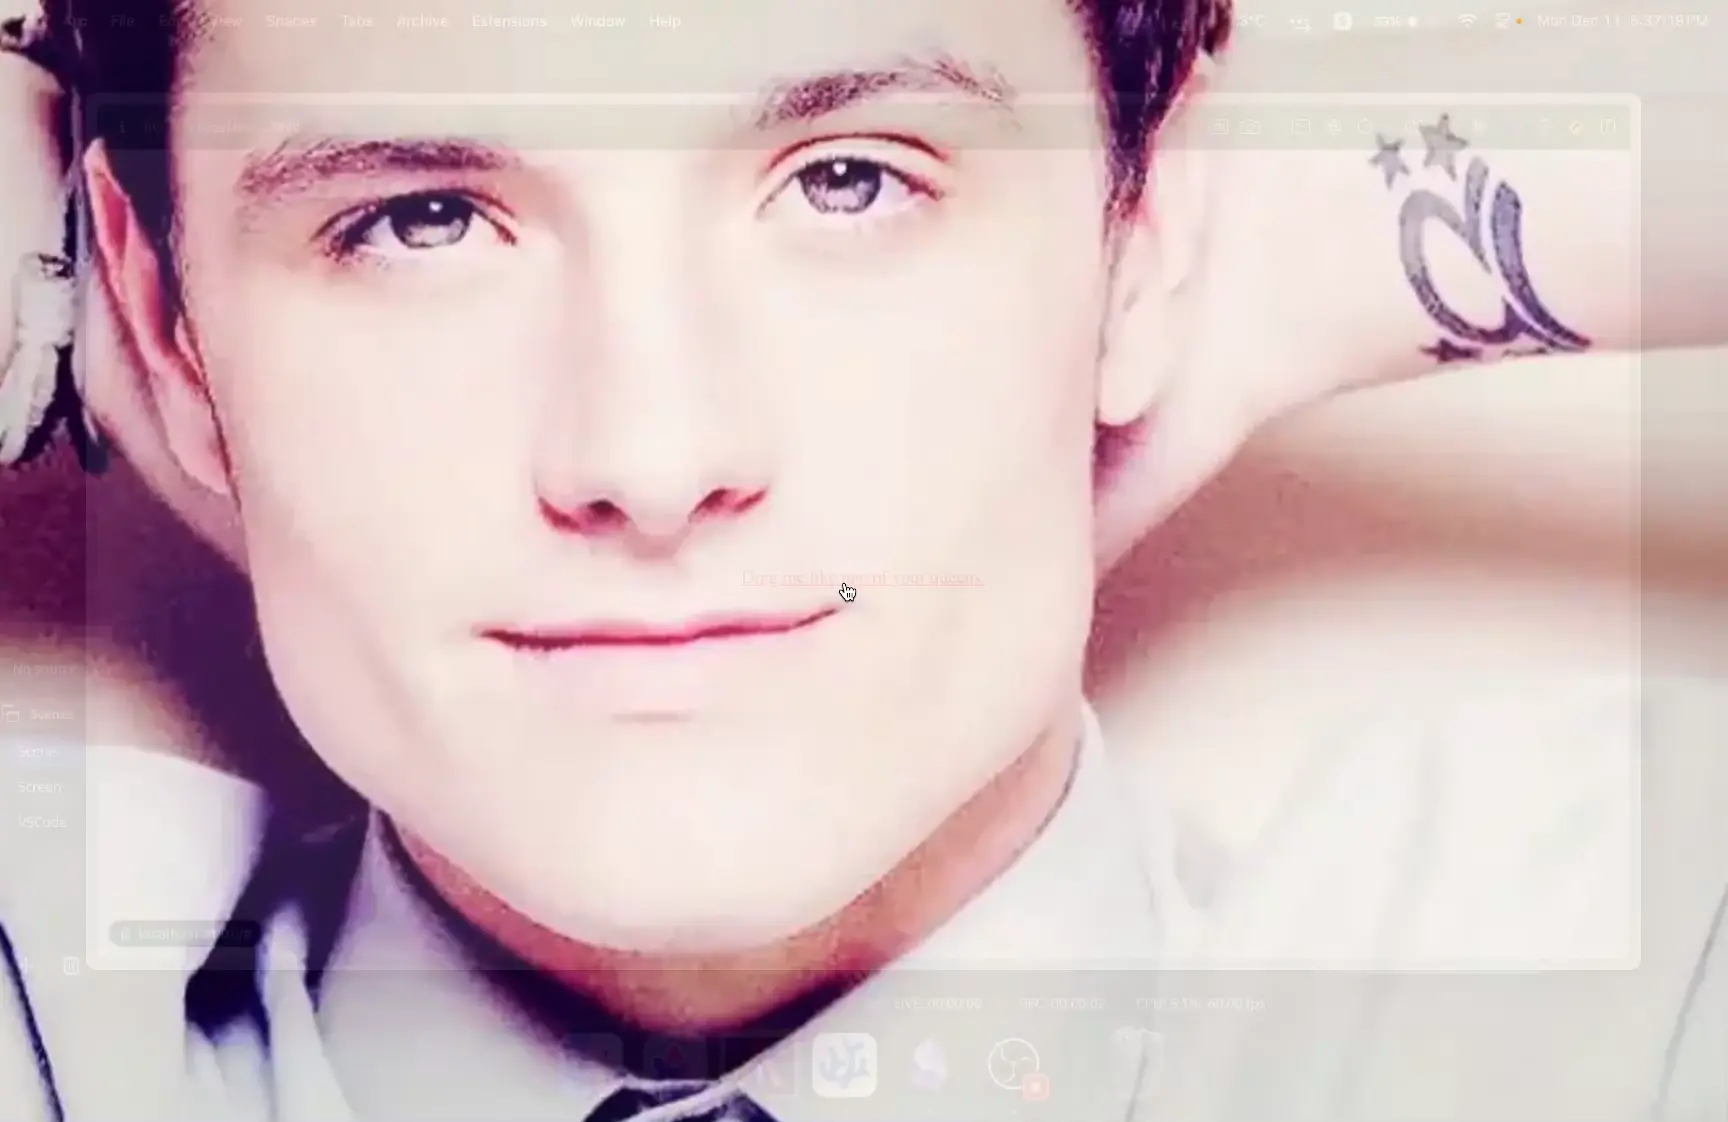 A screenshot of my computer screen, with a large image of Josh Hutcherson overlaid over the entire screen. You can barely make out the desktop behind it.